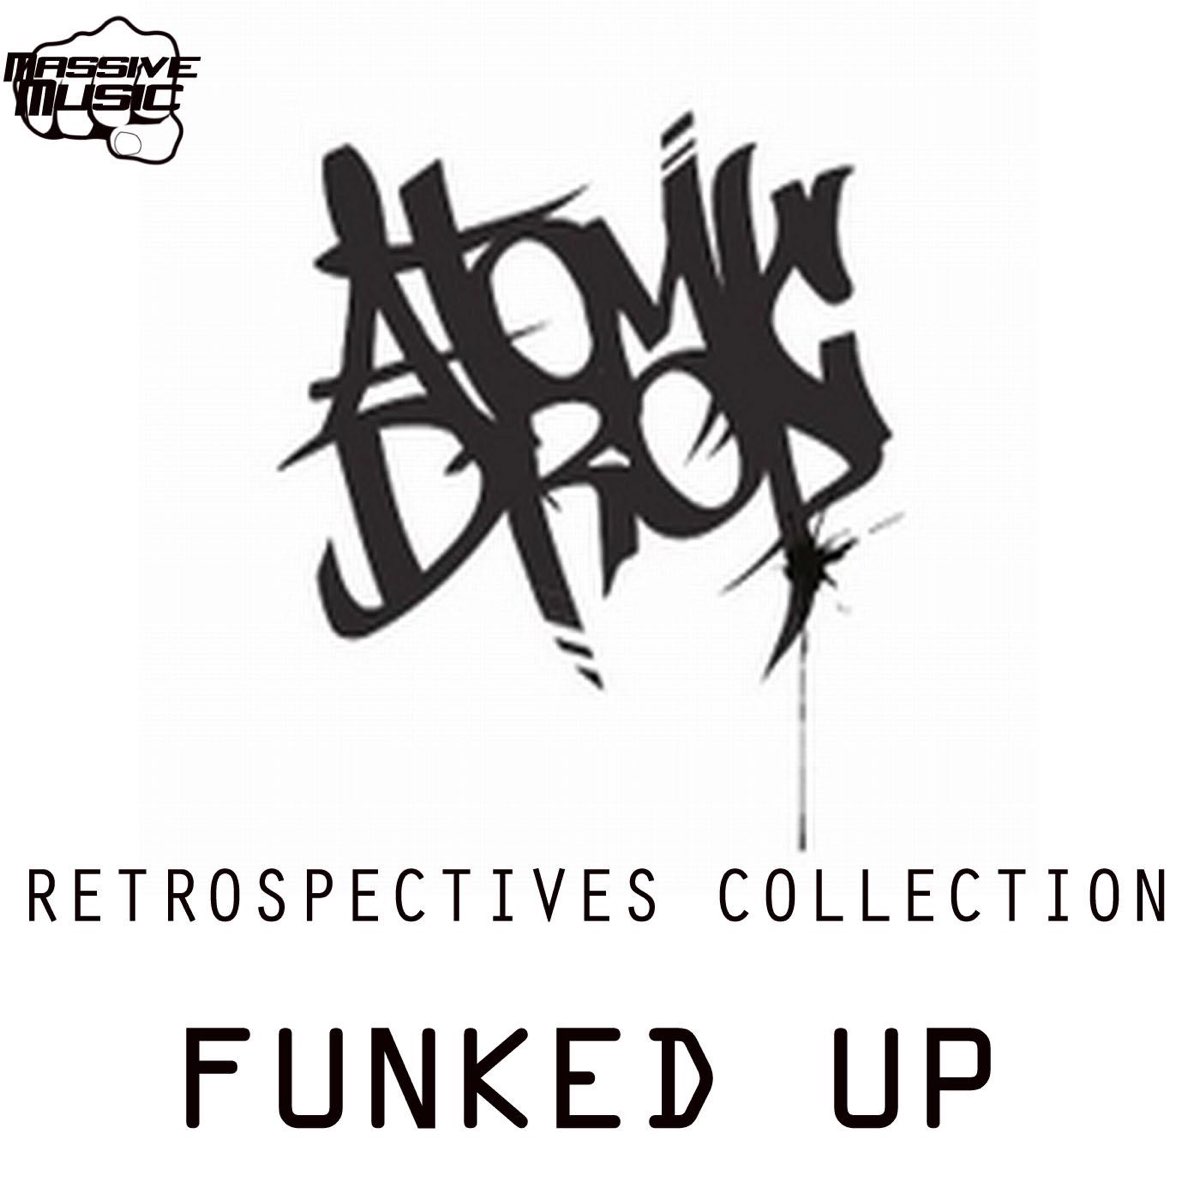 Funked up remix. Funked up. Atomic Drop. Song Funked up. Xxanter Funked up Slowed.